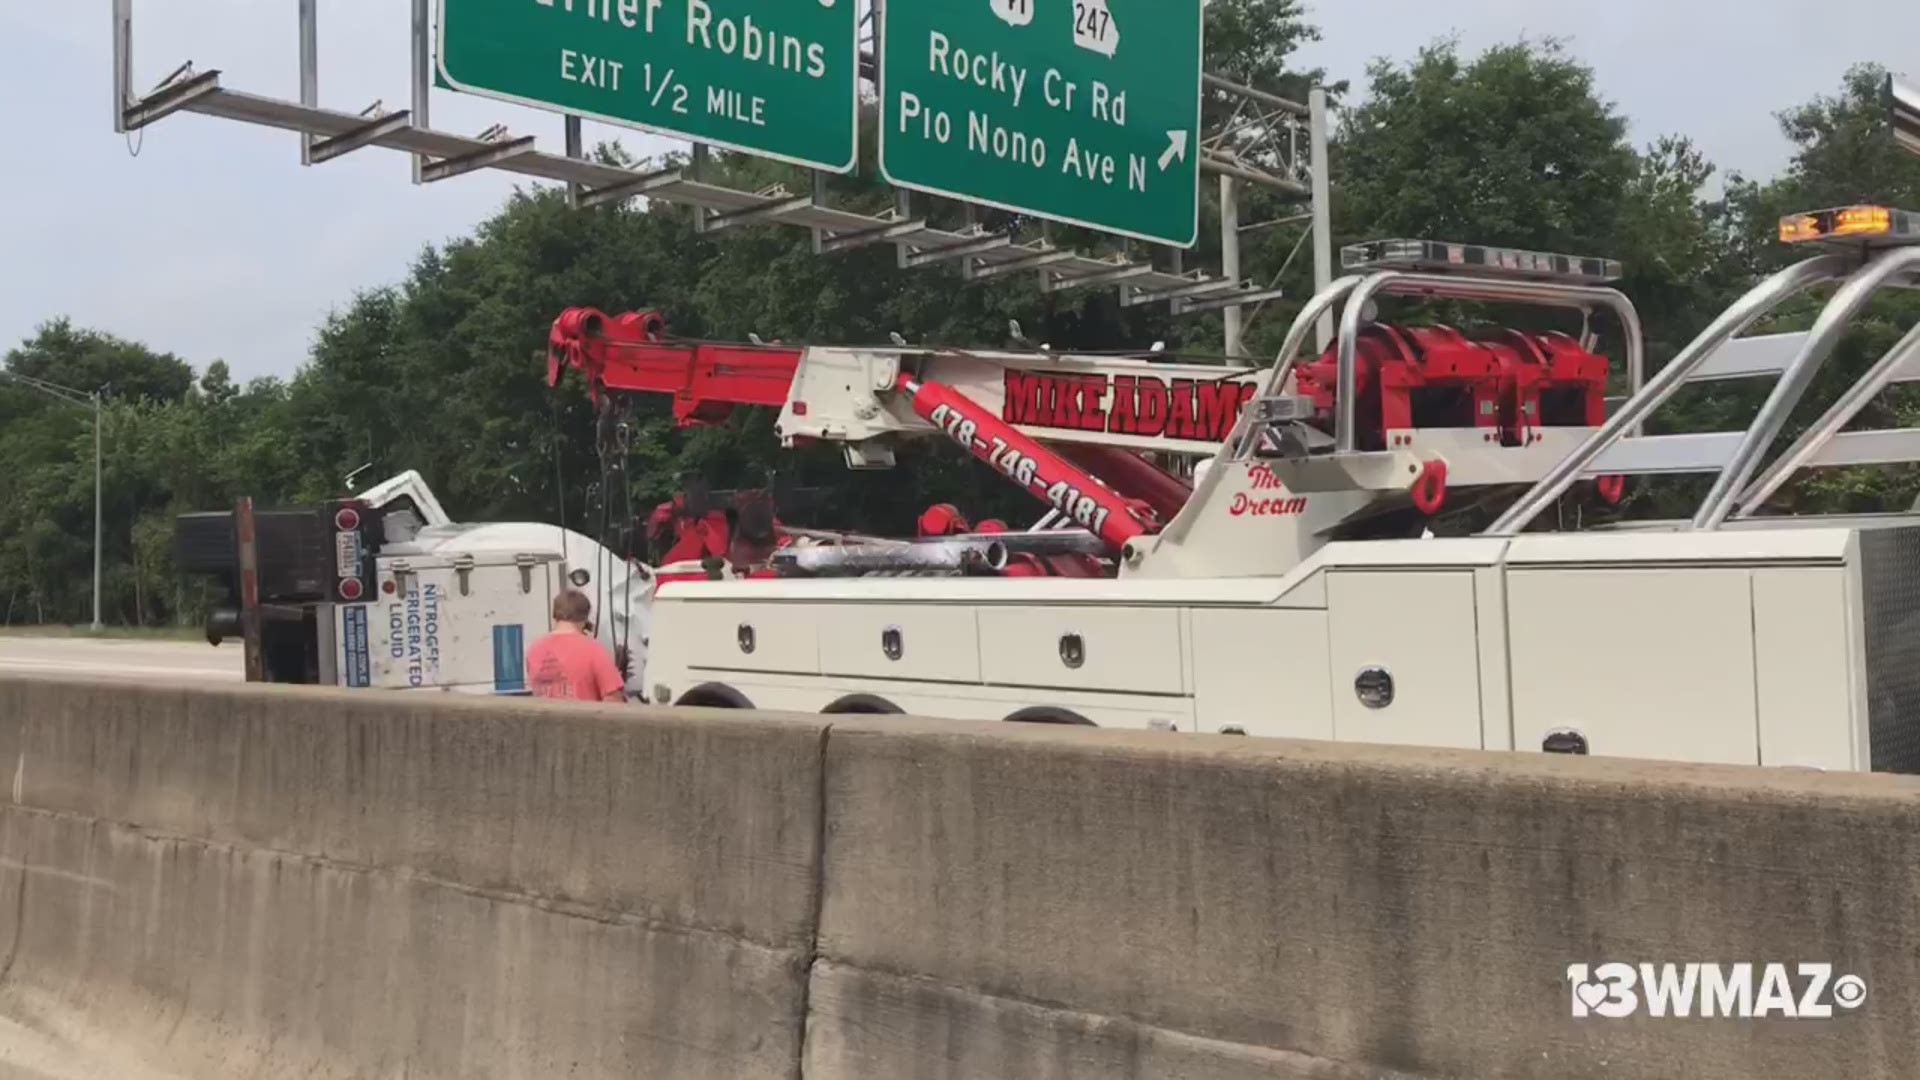 A tweet from the Georgia Department of Transportation says crews are working to clear an accident involving a tractor trailer and hazmat spill.